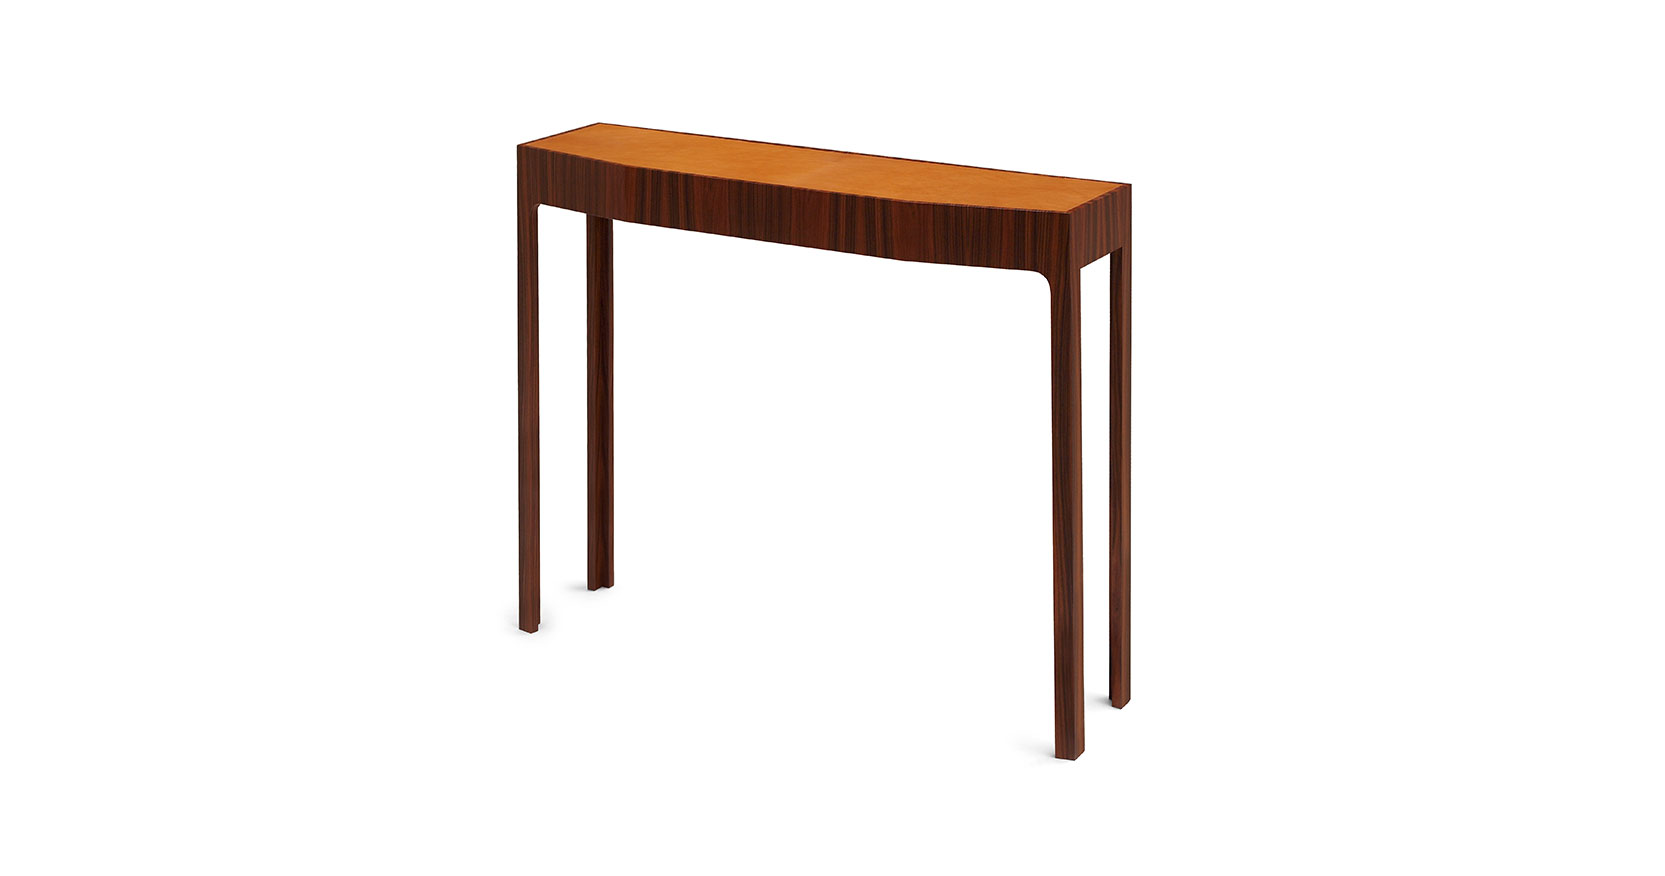 Eric Jourdan, minimalist console table, caramel leather top, strict caramel-colored wooden legs